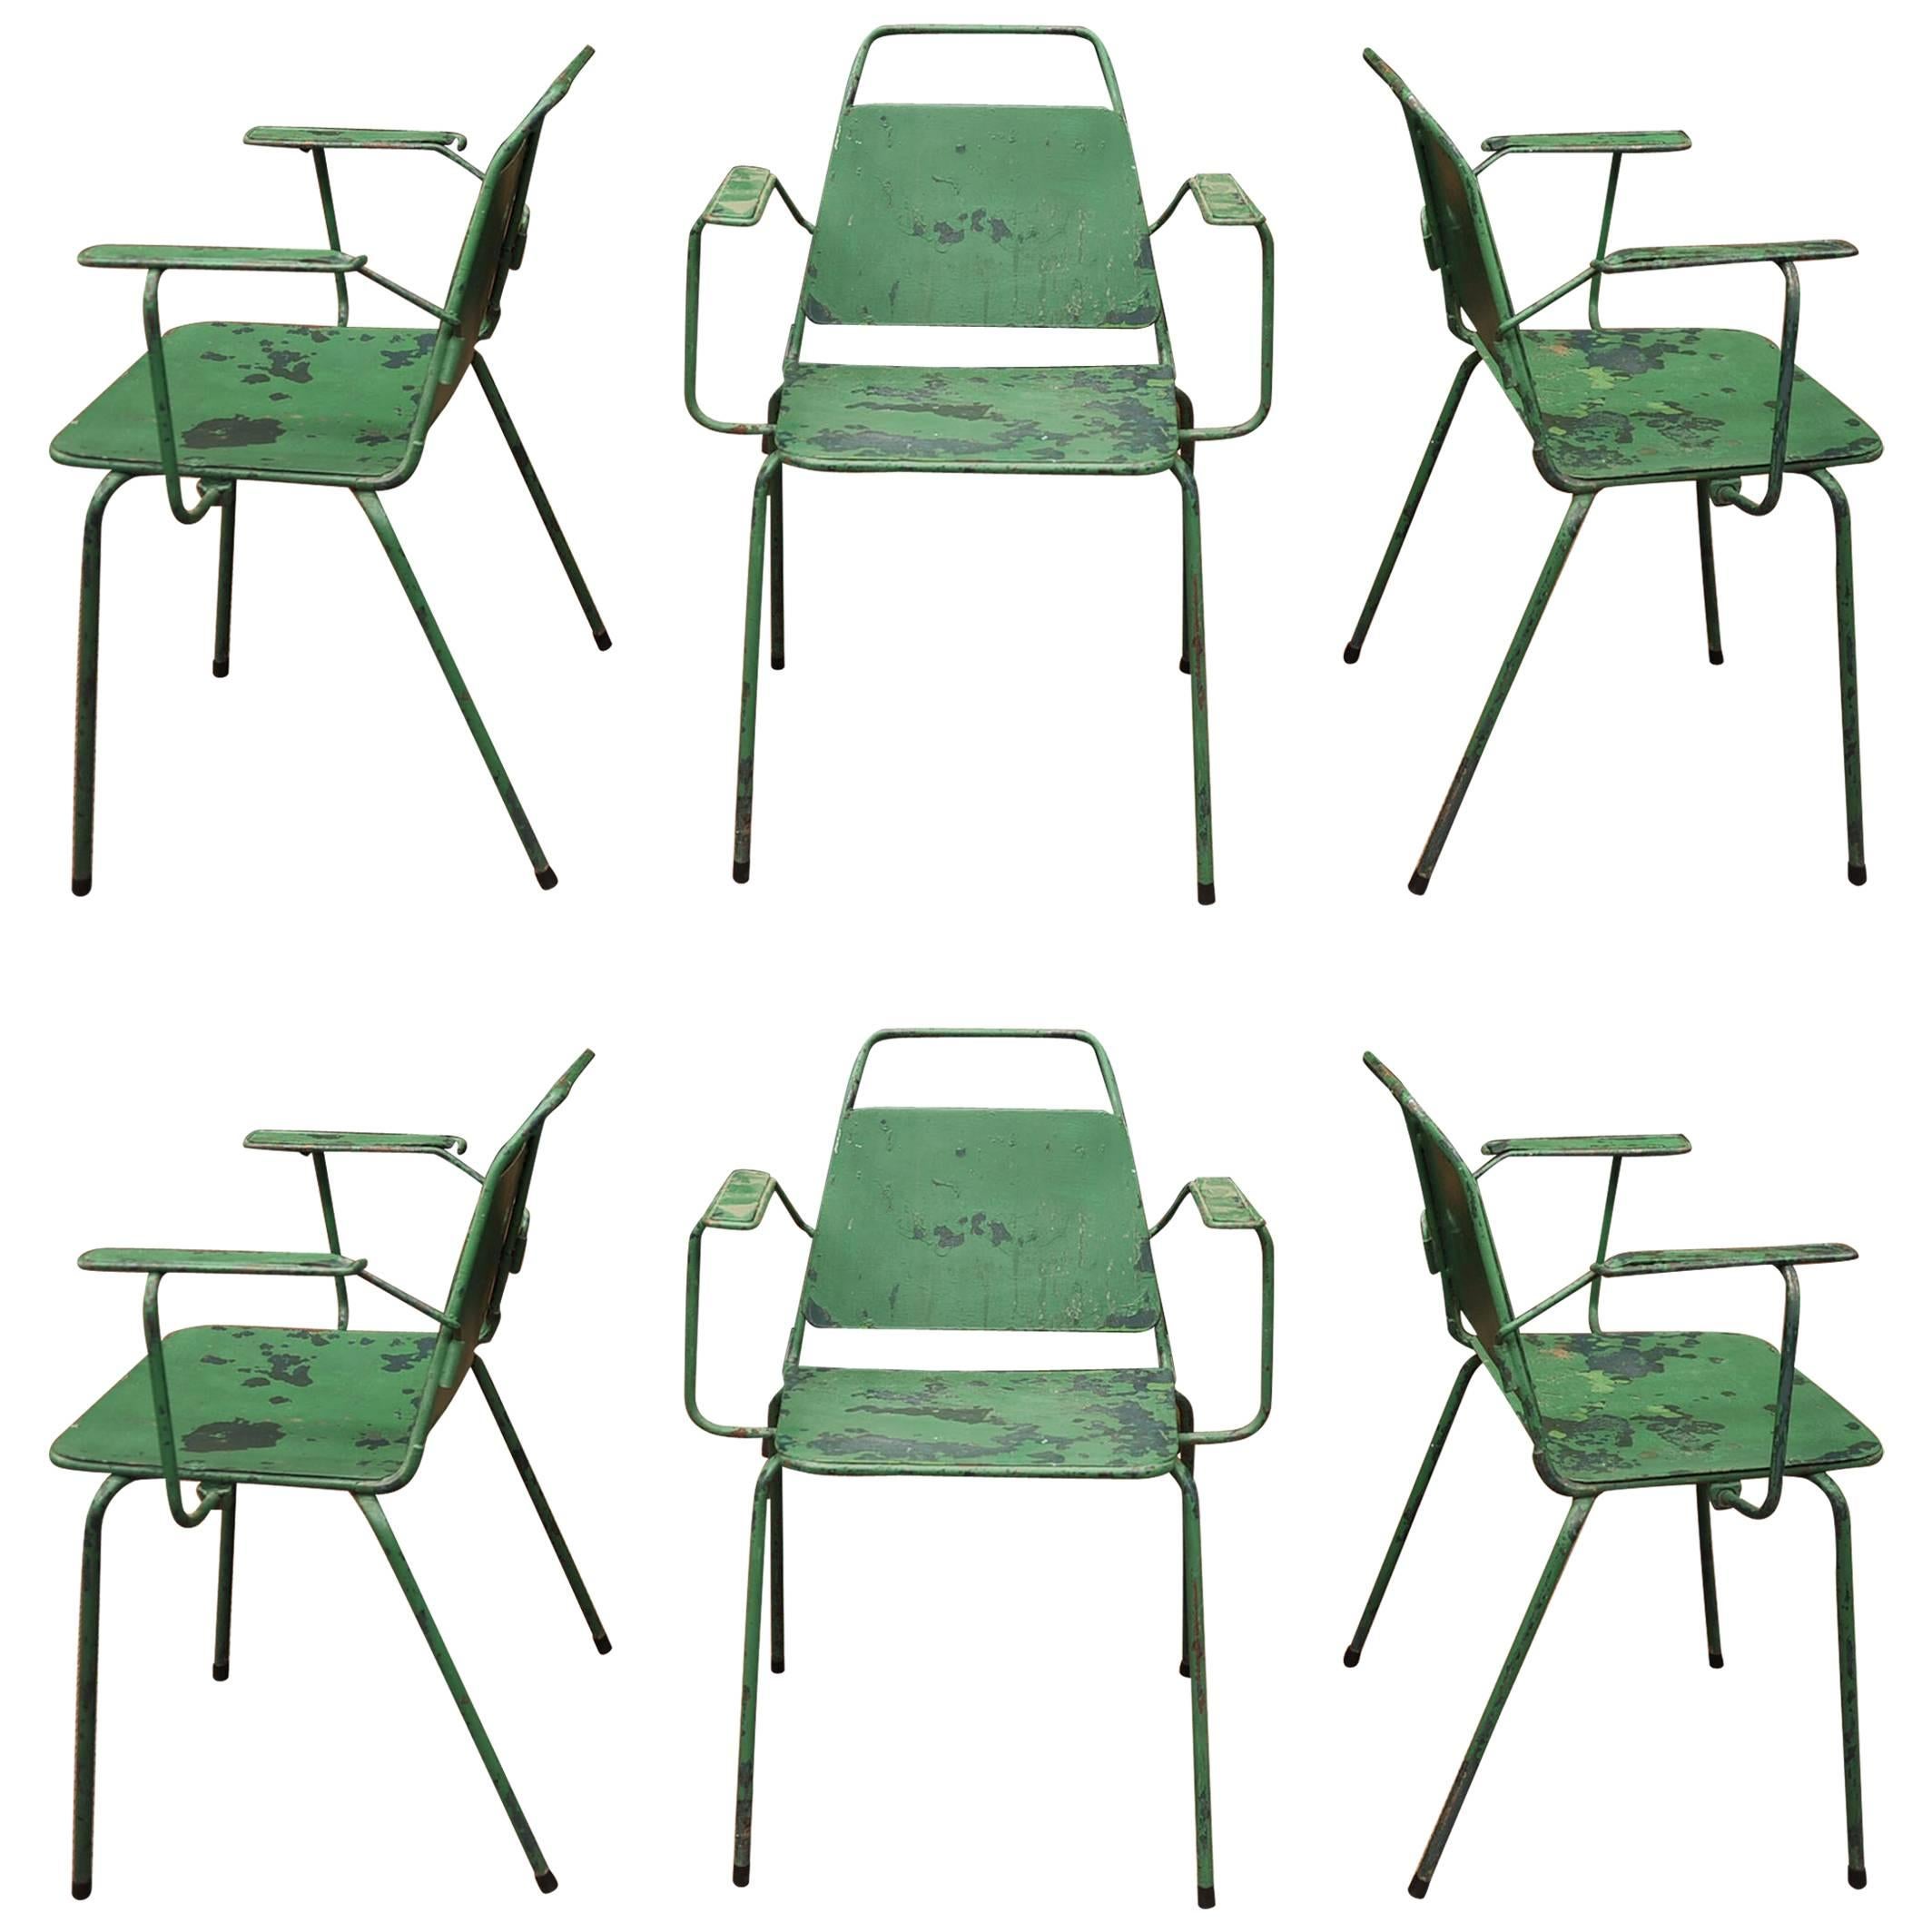 Set of Six French Iron Garden Stackable Design Chairs, 1940s